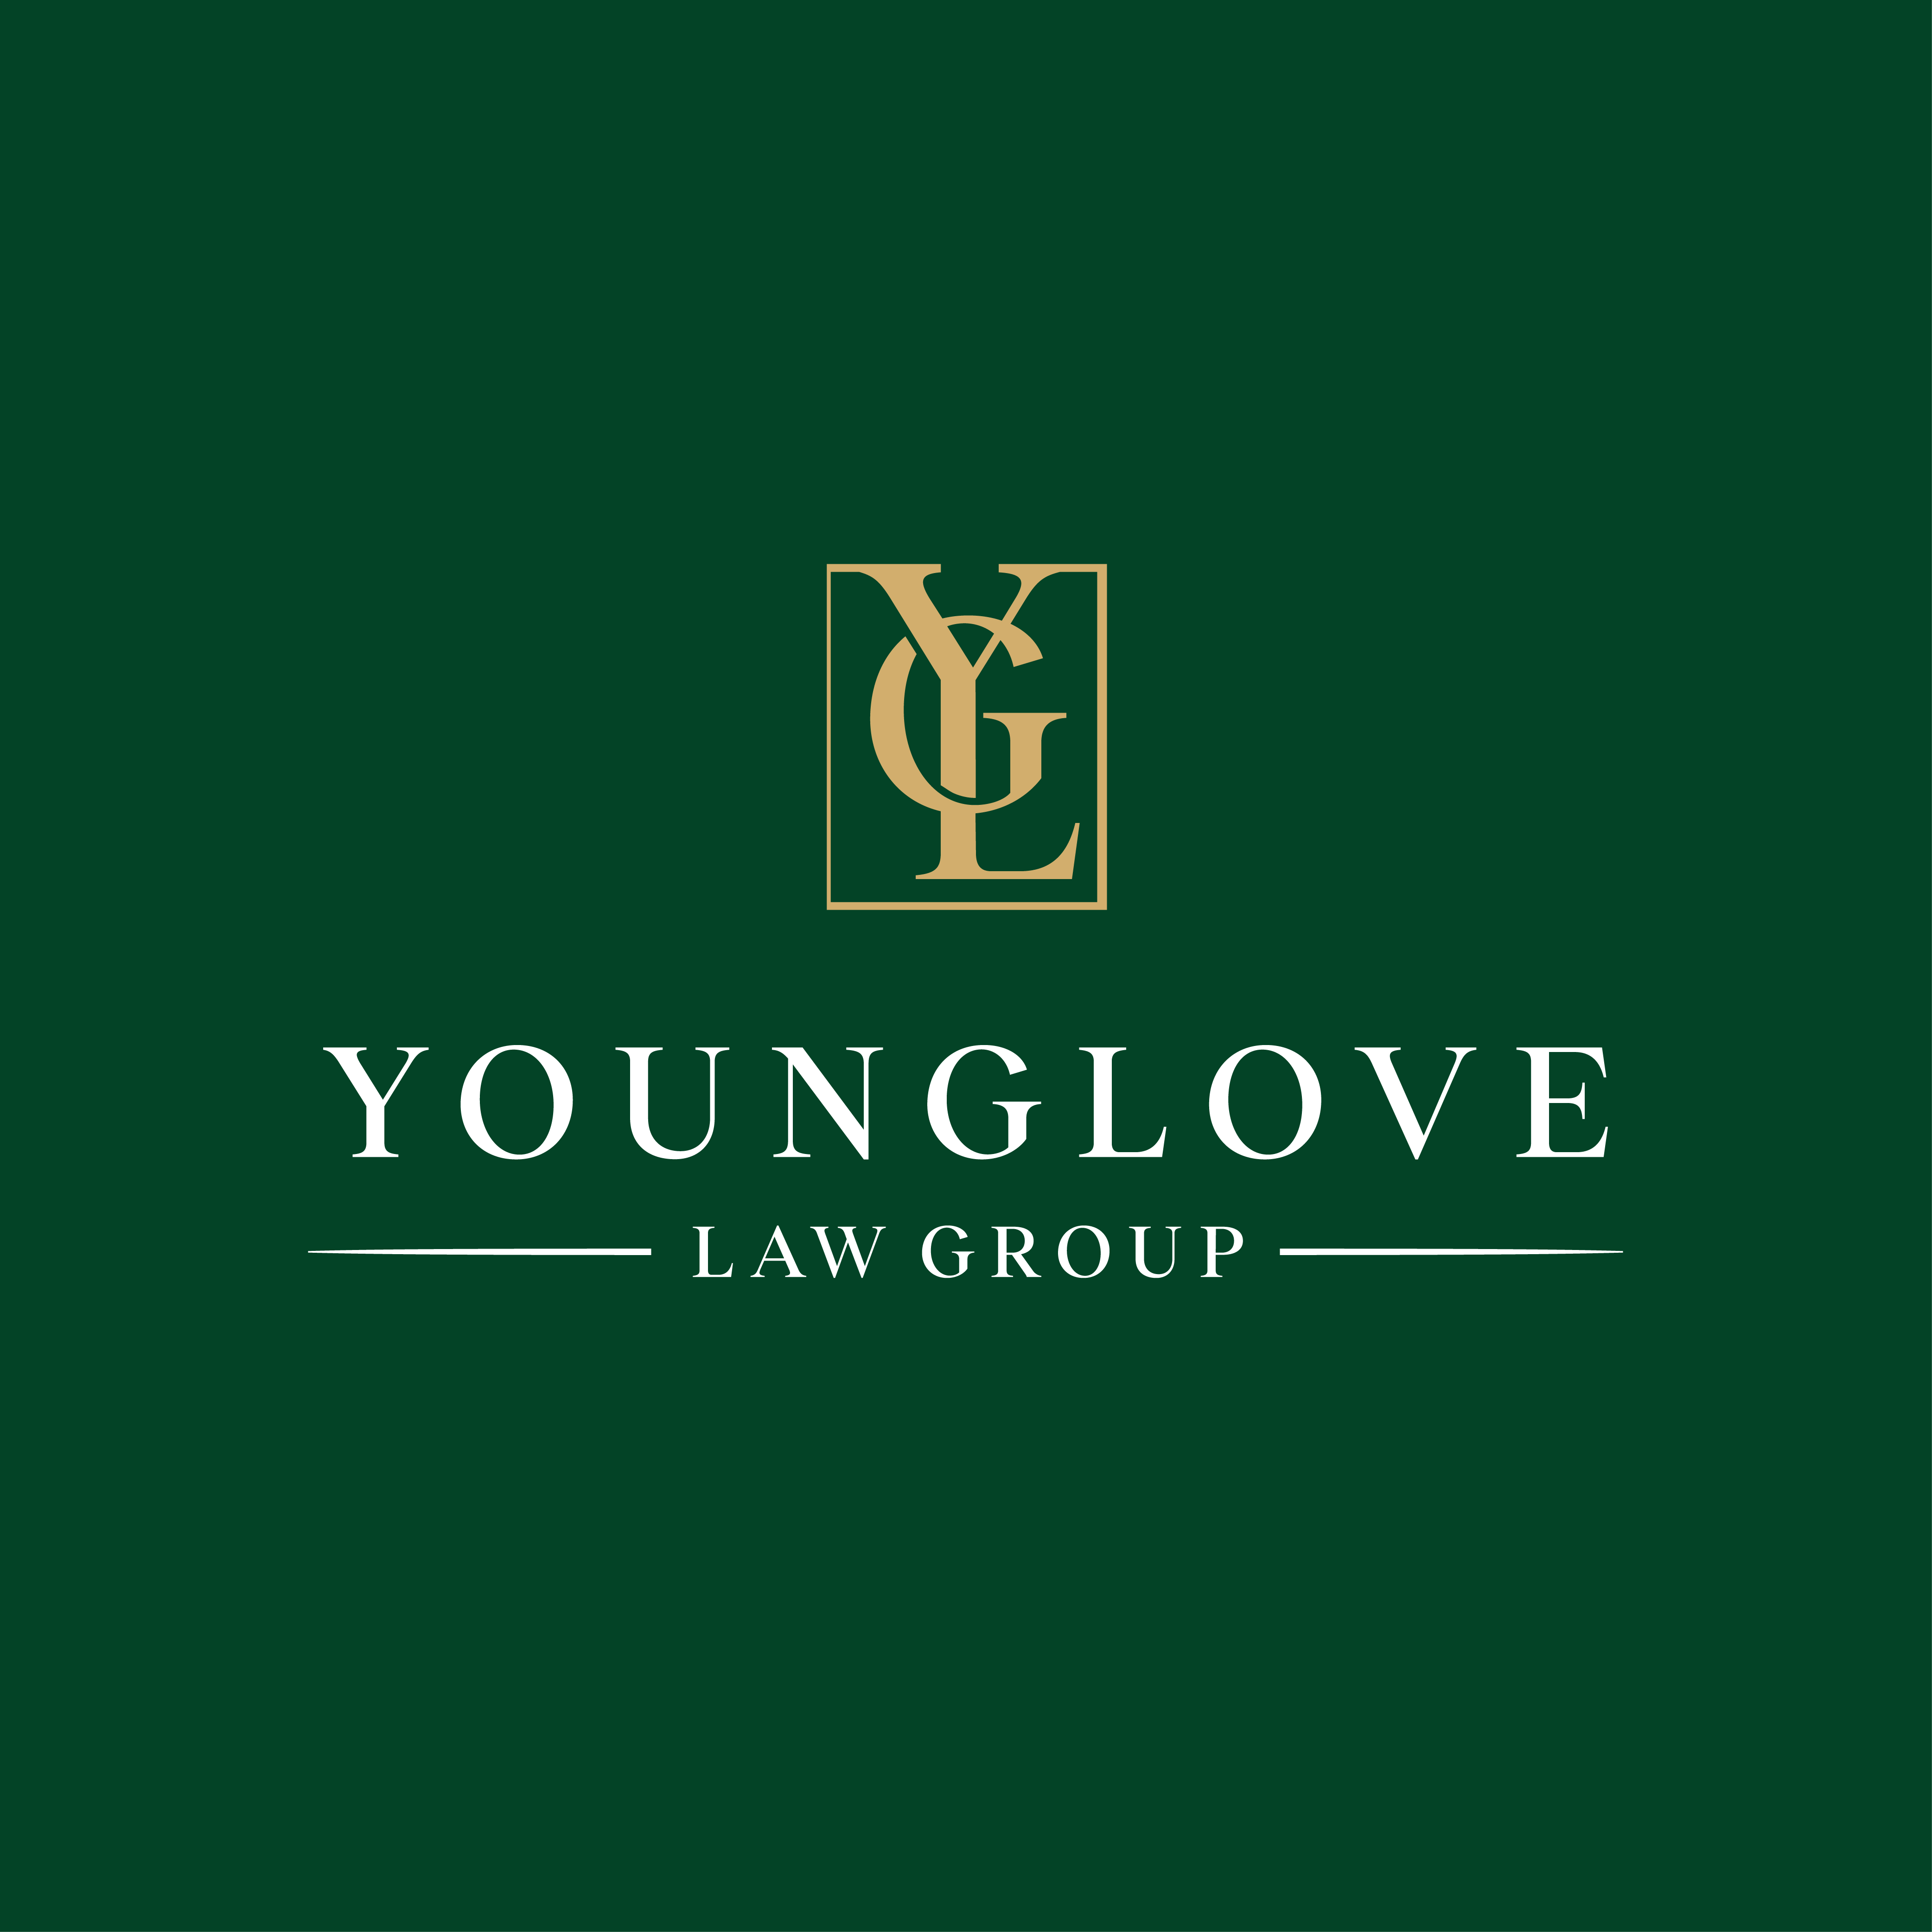 Younglove Law Group Personal Injury & Accident Attorneys - Newport Beach, CA 92660 - (844)810-1800 | ShowMeLocal.com